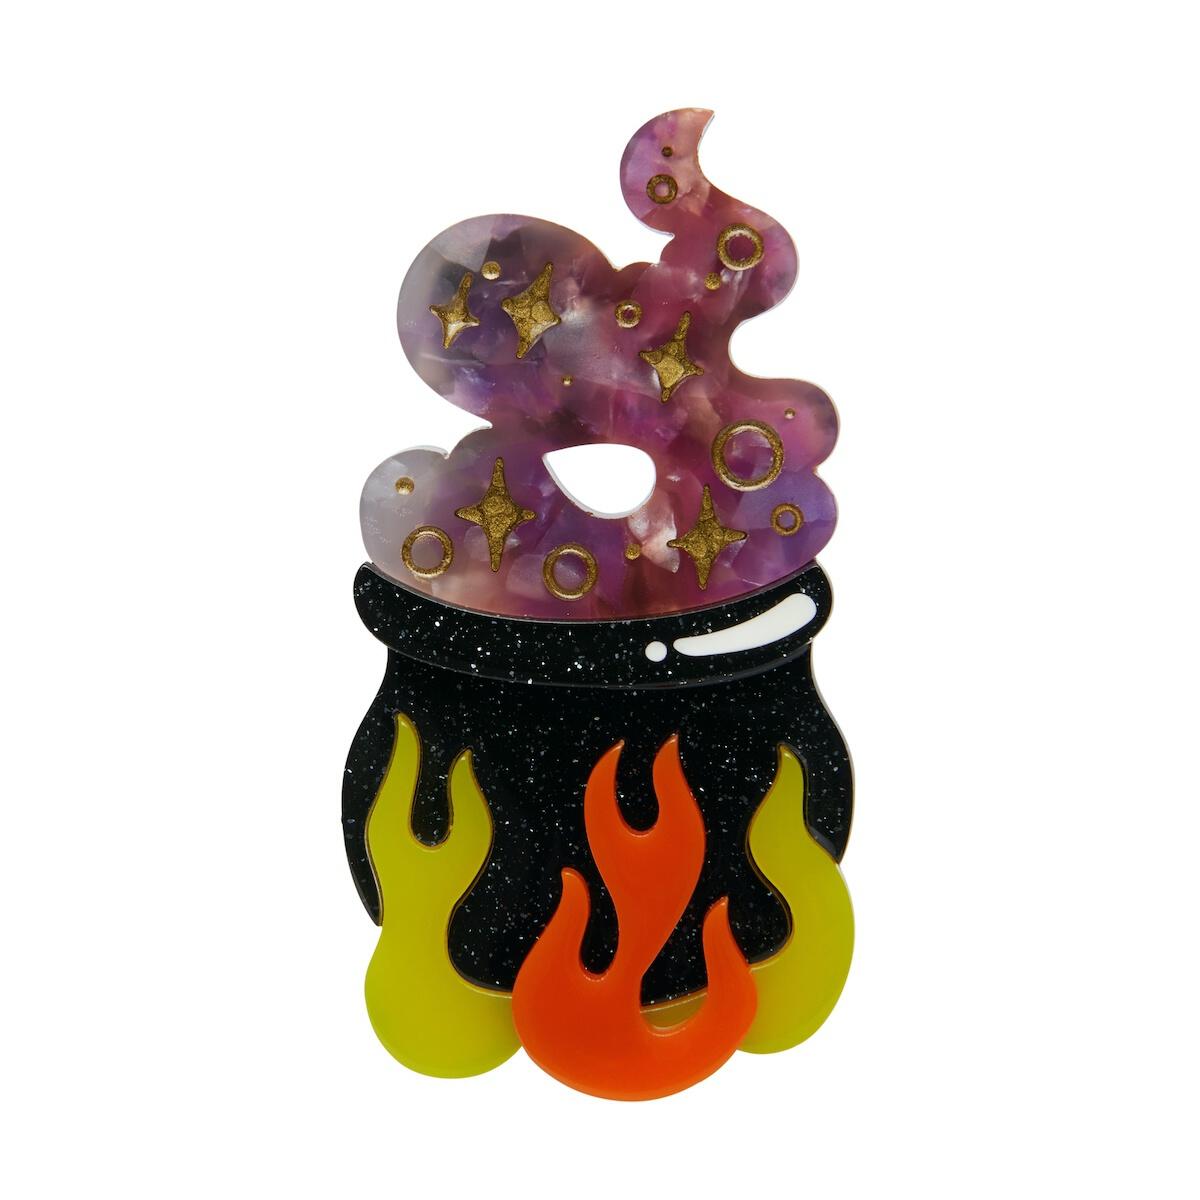 "Cauldron Chitter Chatter" witch's brew in a glitter-y black cauldron over flames layered resin brooch